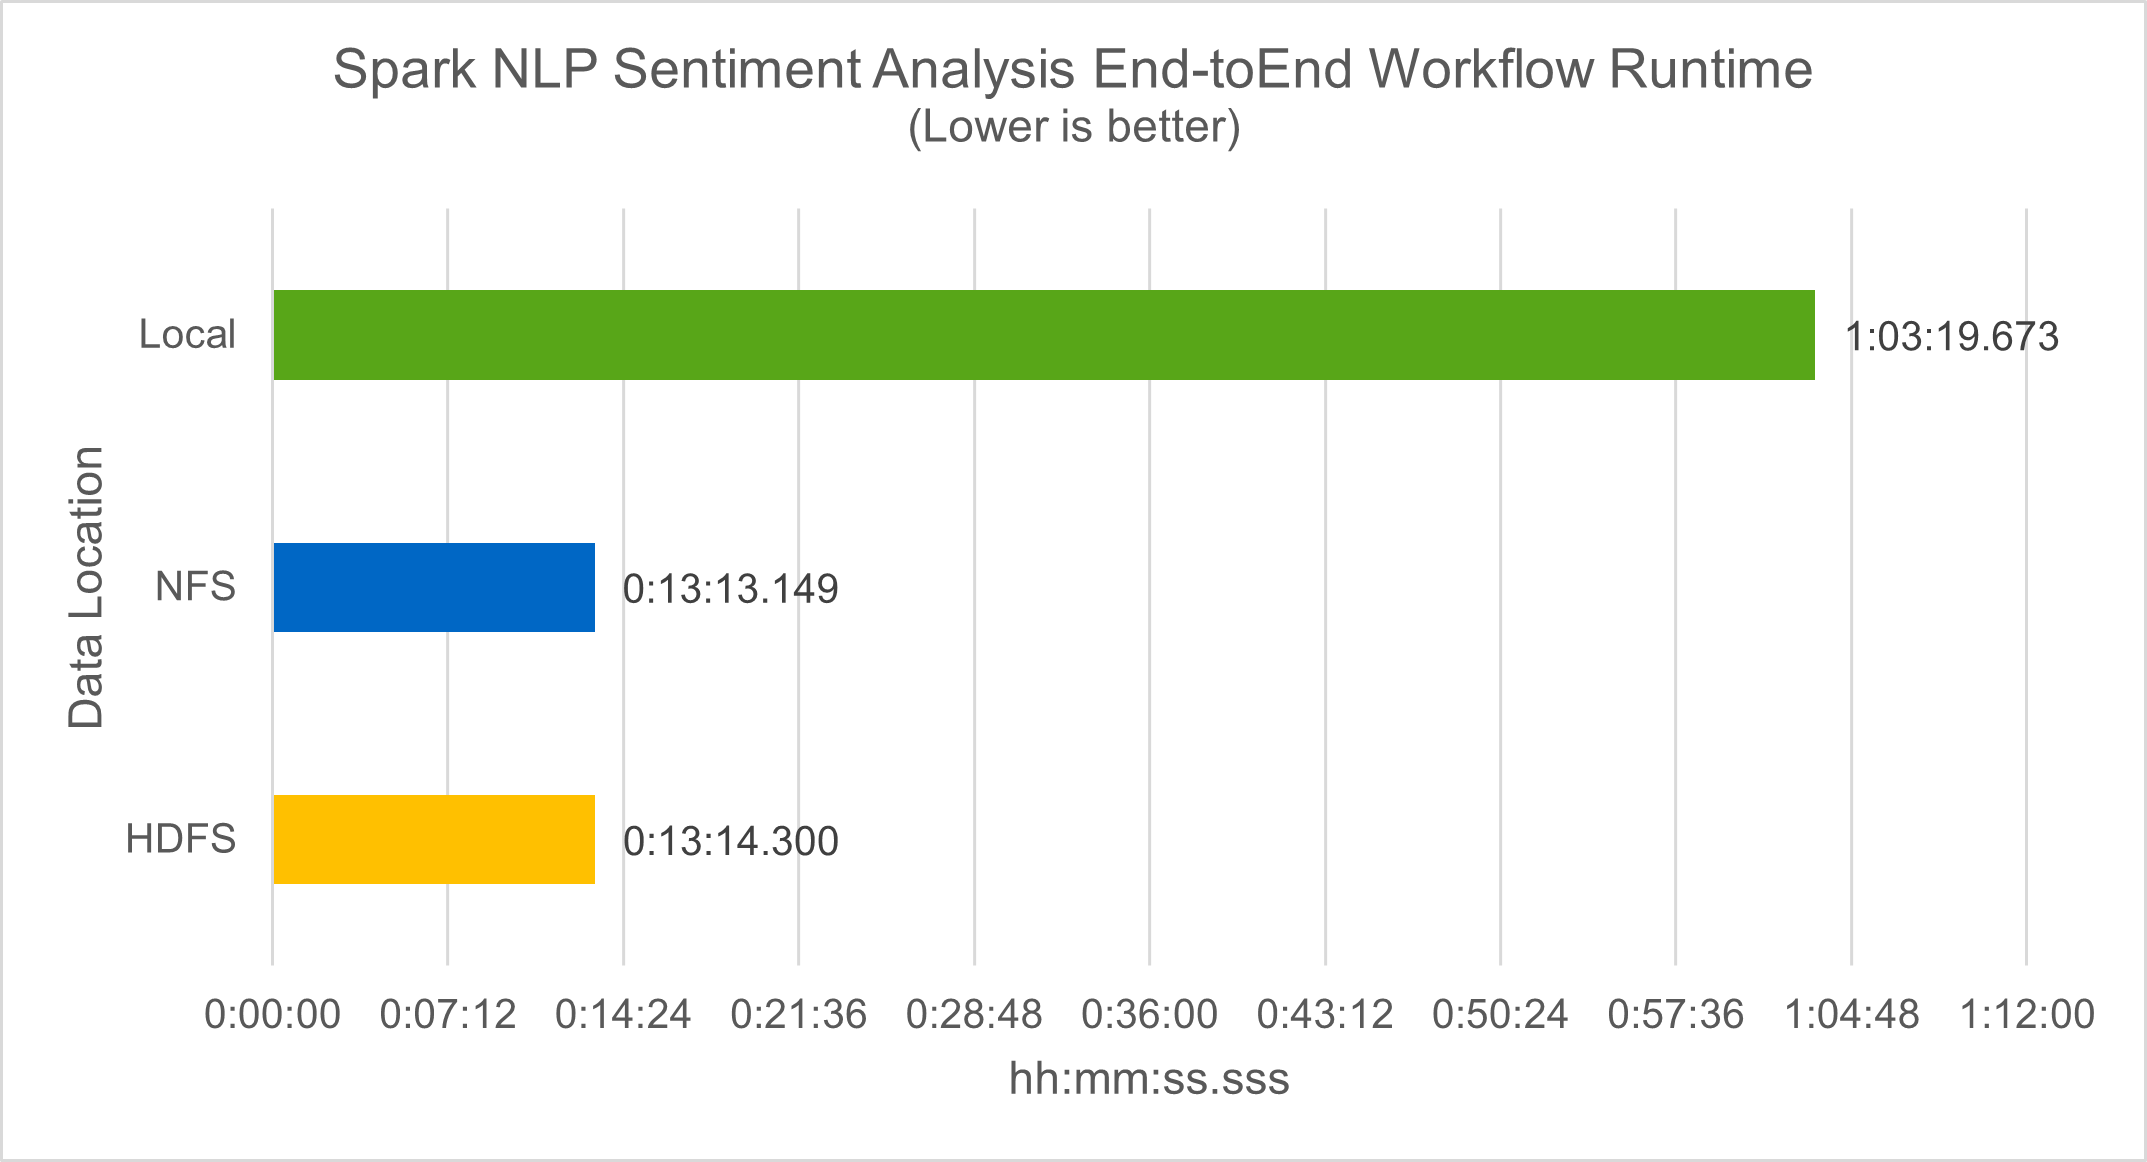 Spark NLP sentiment analysis end-to-end workflow runtime.